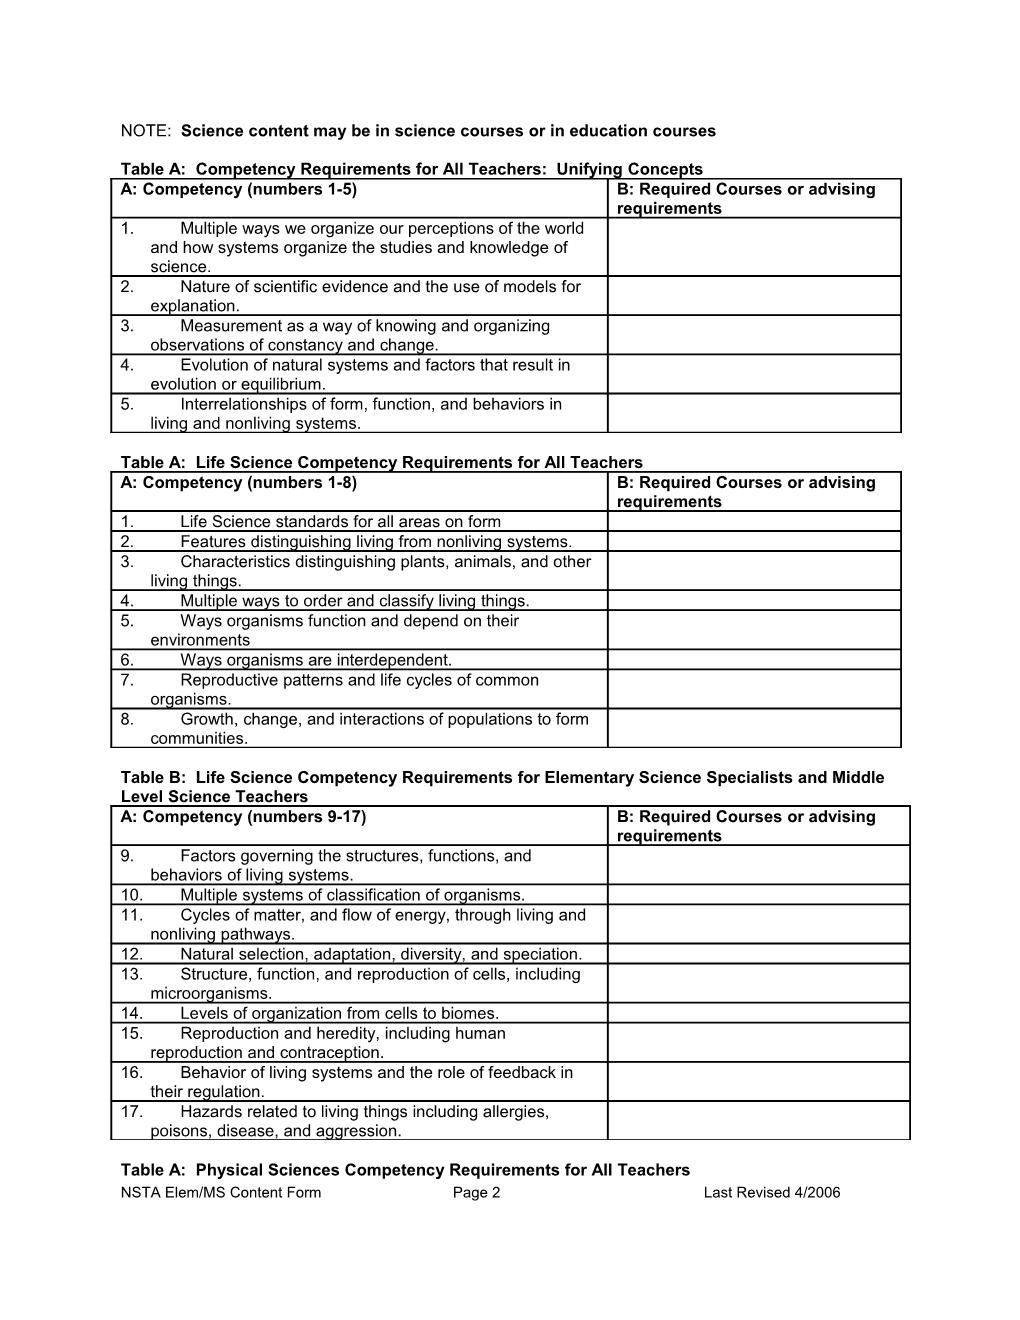 Science Content Analysis Tables for Elementary/Middle School Specialists and General Science